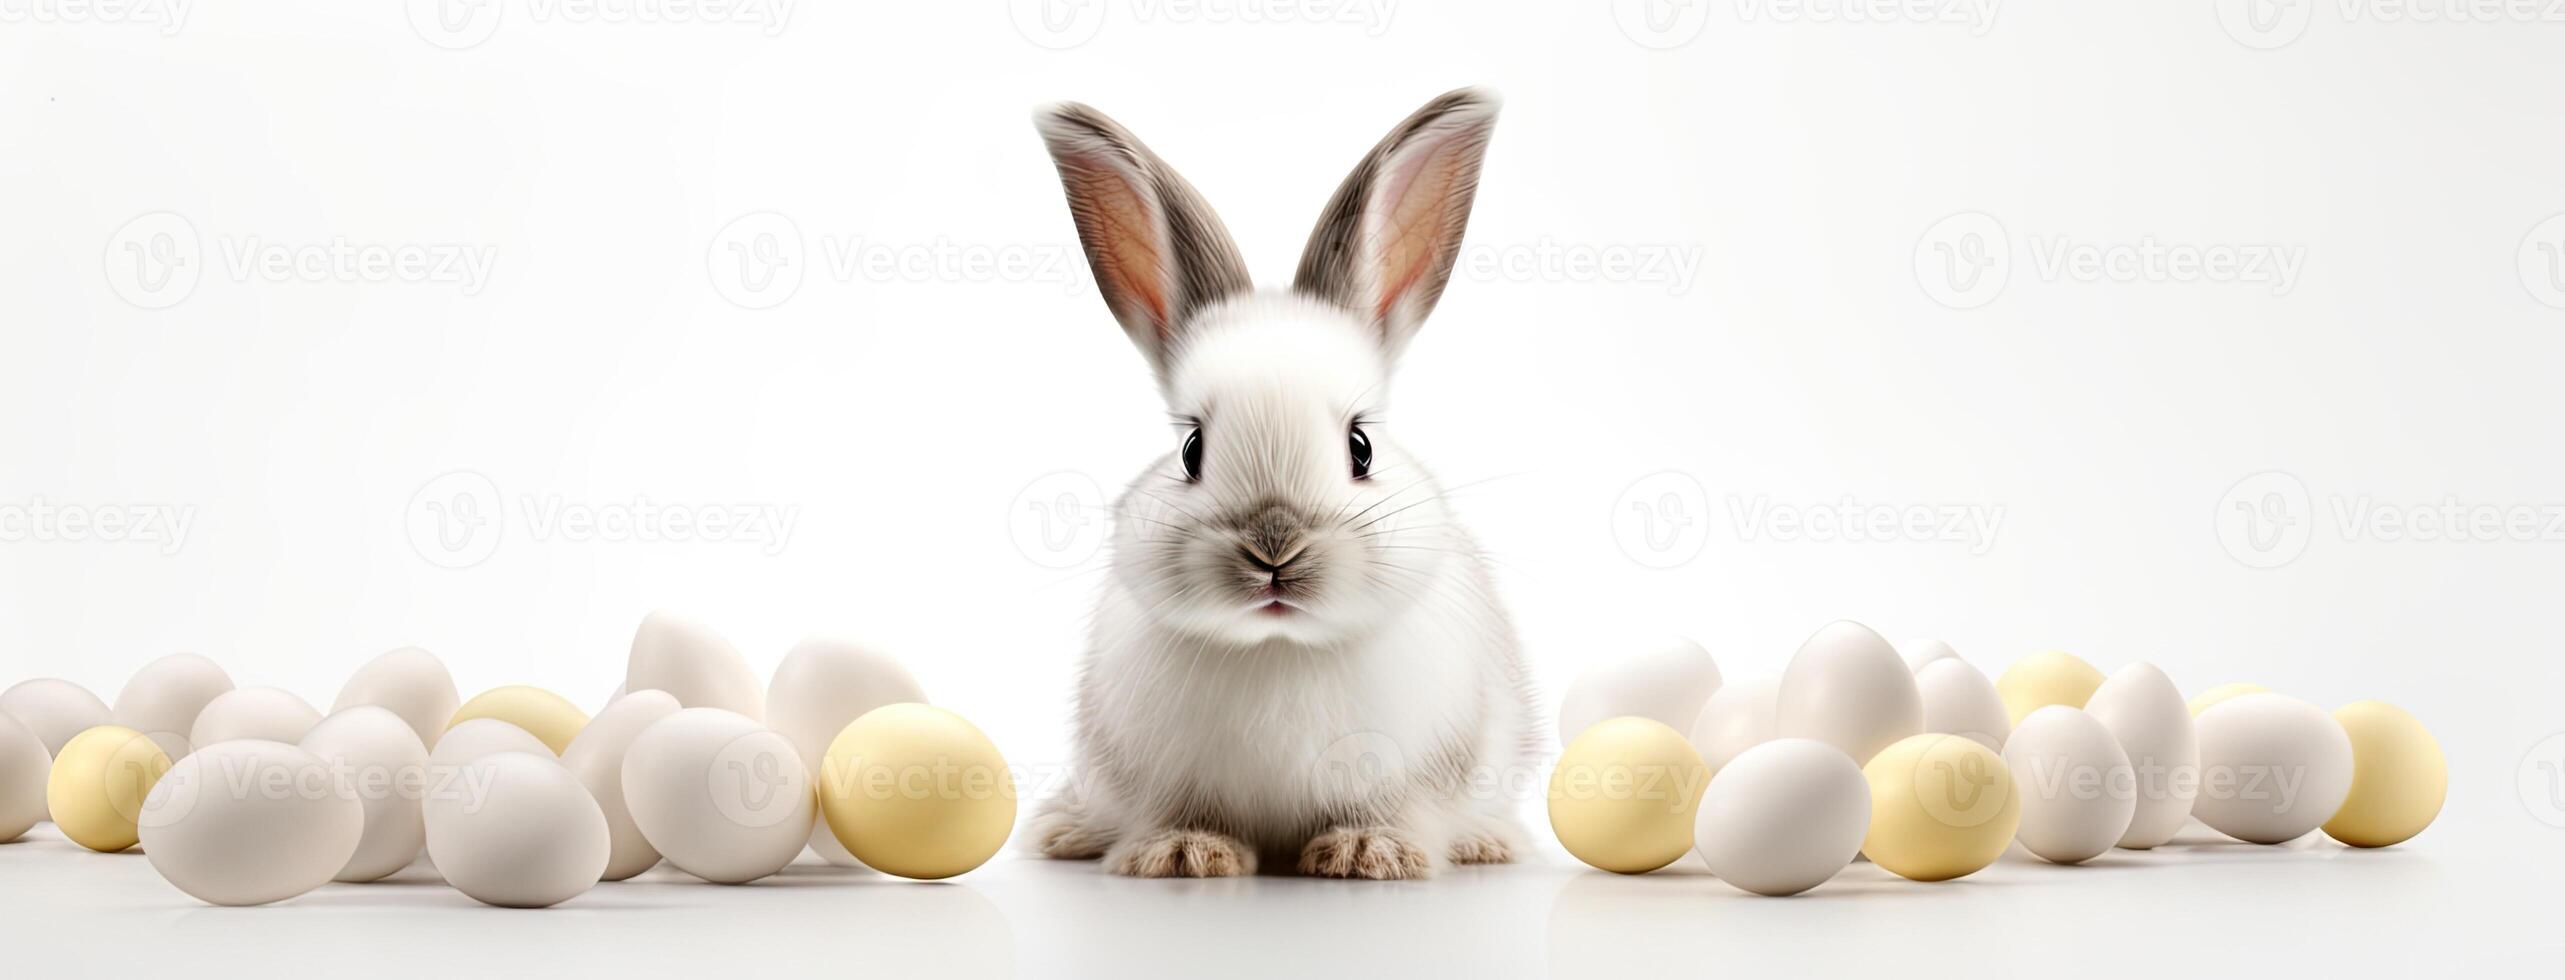 AI generated a super funny and cute white Easter bunny surrounded by chocolate eggs, perfect for an Easter advertising campaign against a solid white background. photo